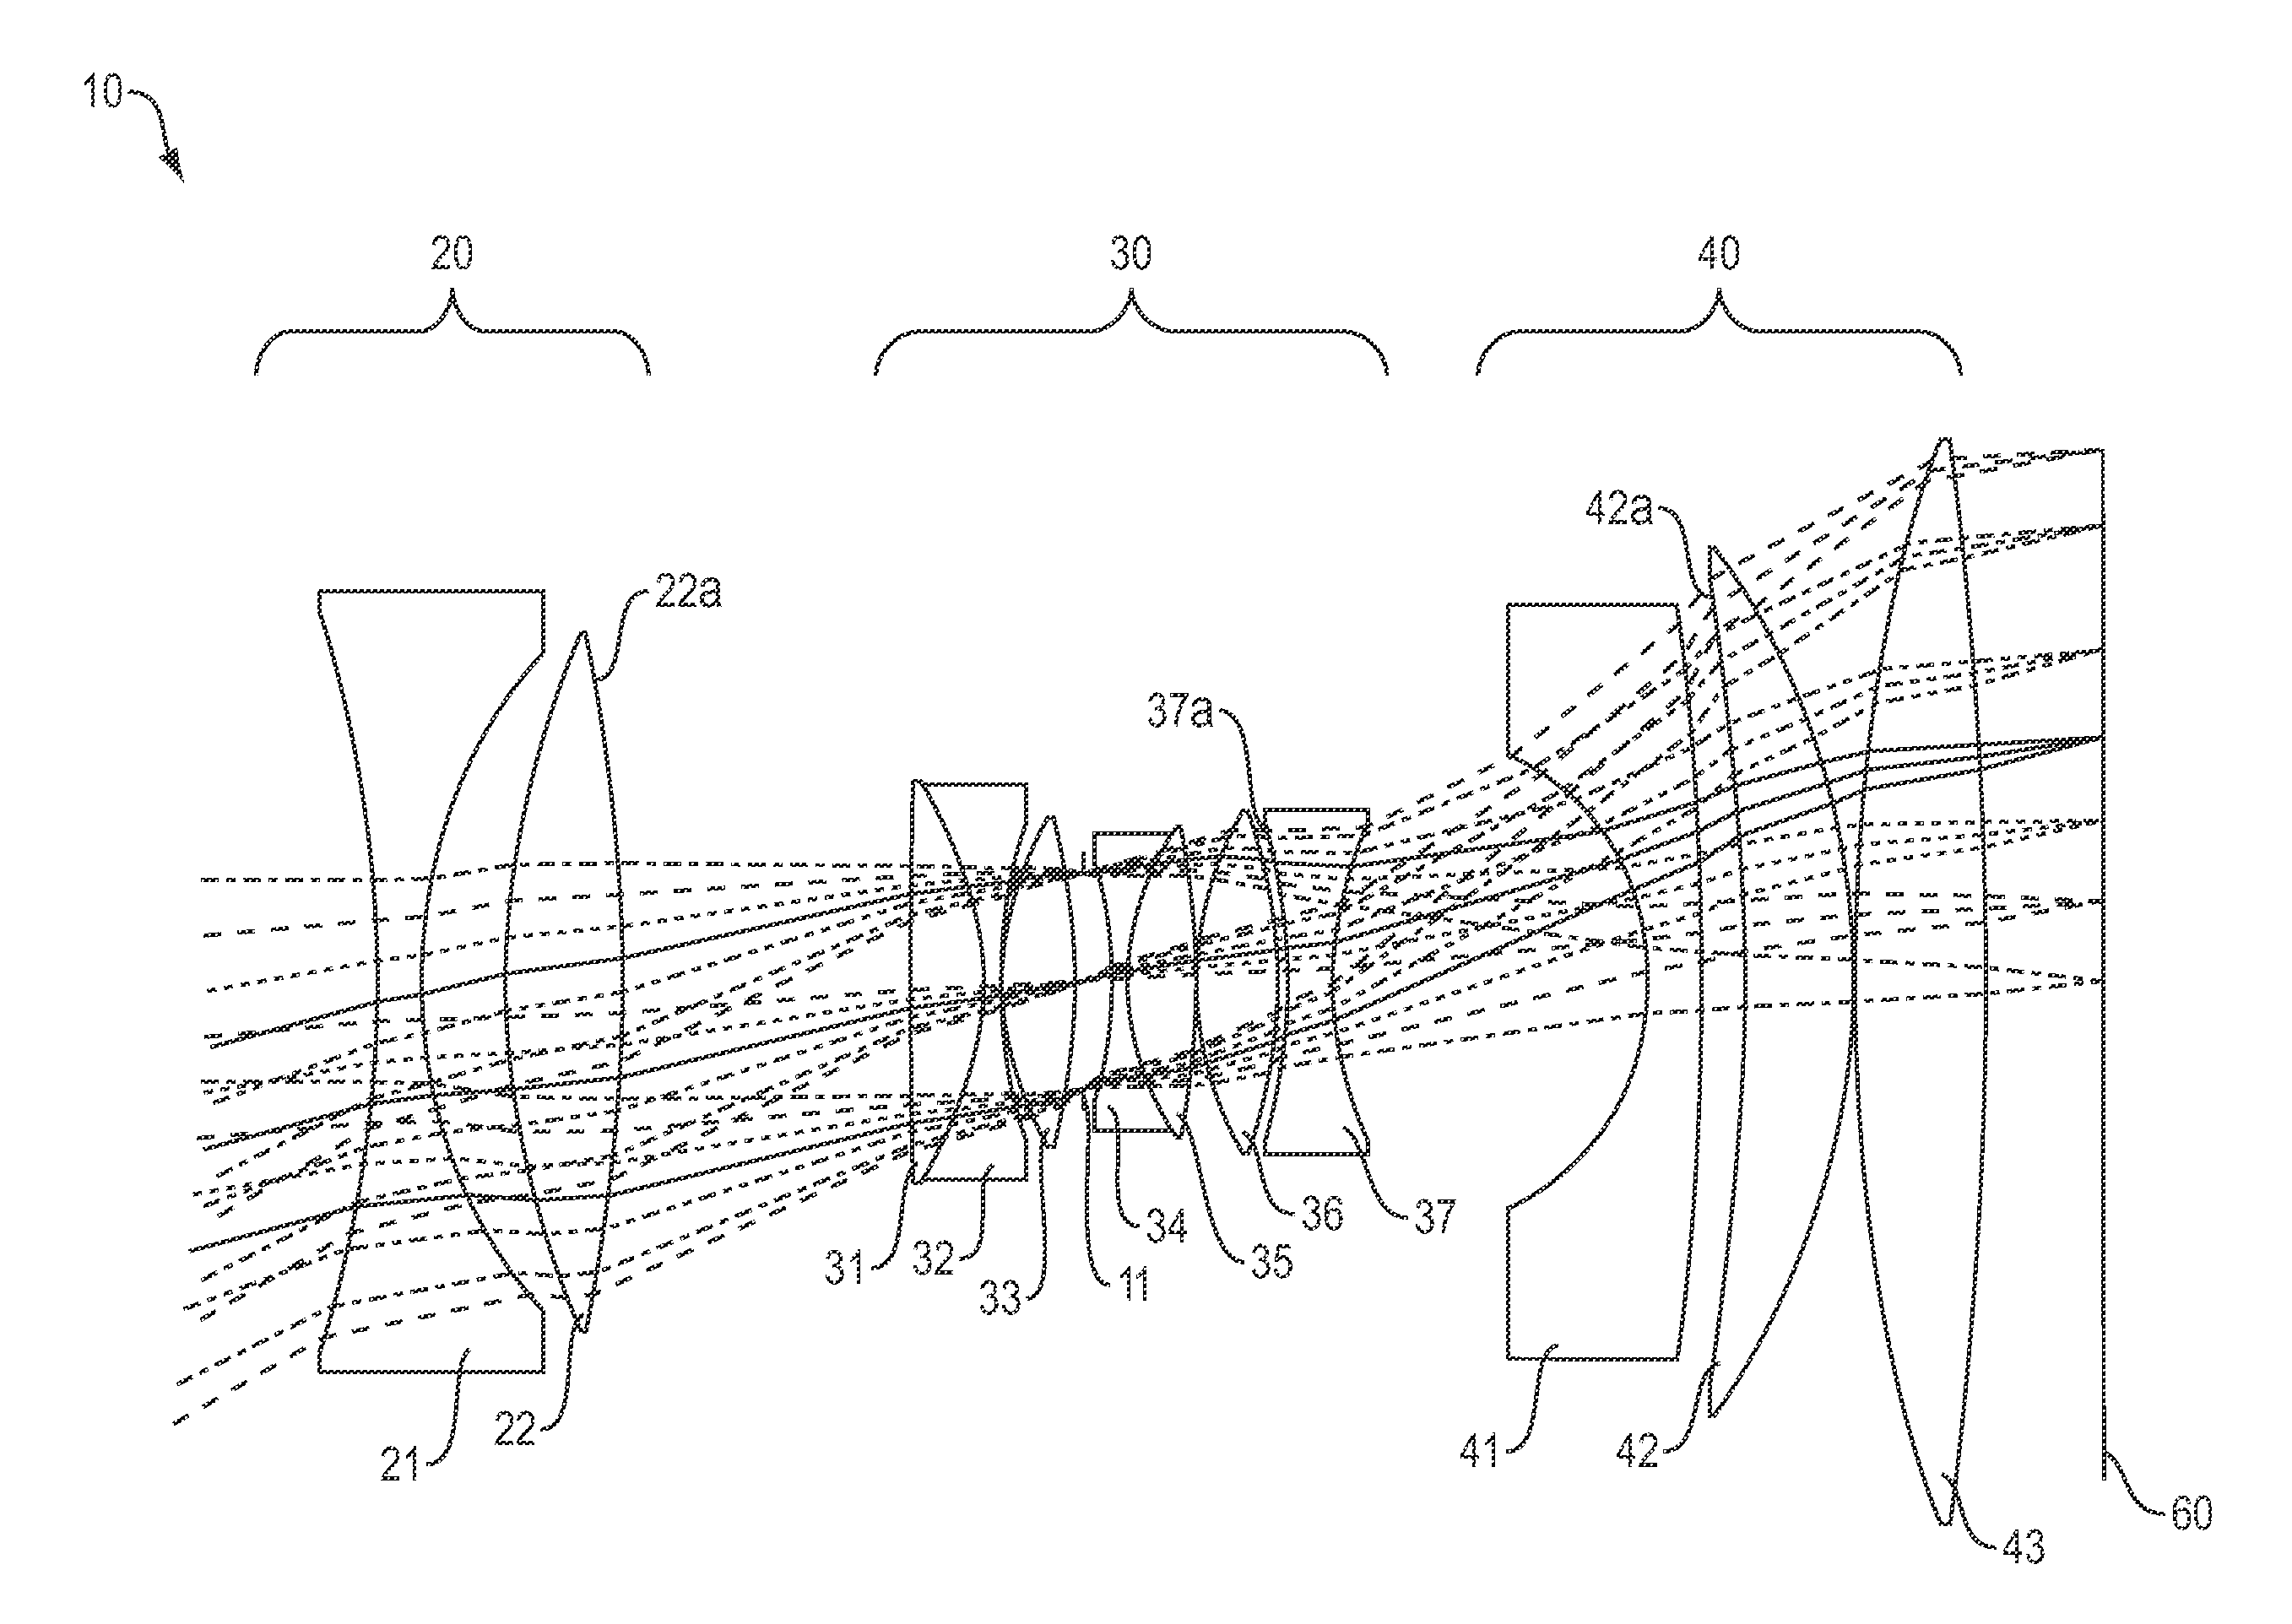 Low distortion athermalized imaging lens